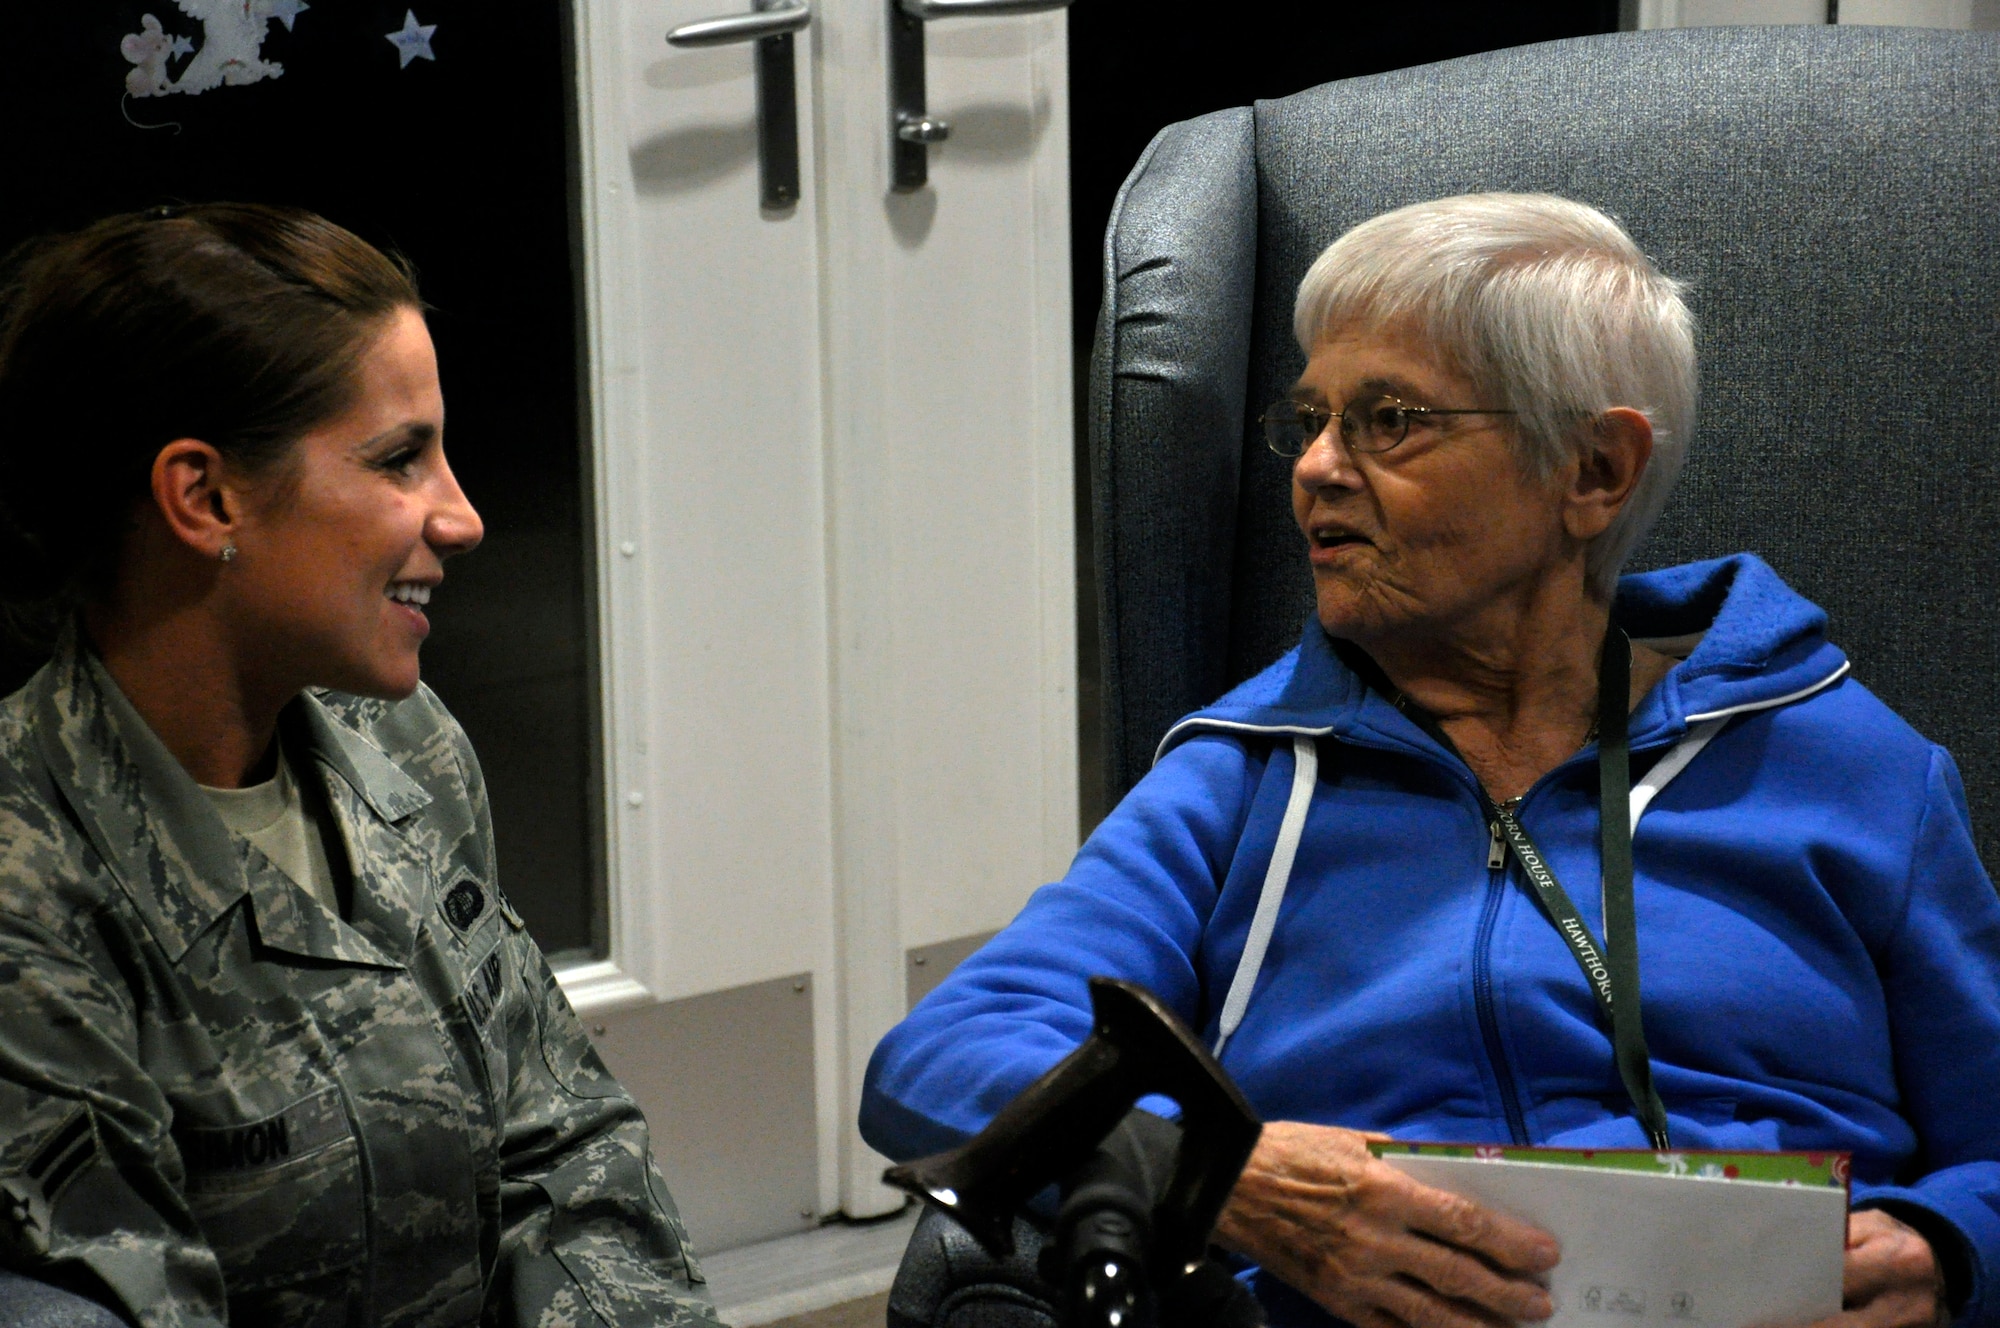 Airman 1st Class Stefanie Simon, 1st Special Operations Contracting Squadron, left, visits with Ruth Hunter, a resident of the Air Force Enlisted Village's Hawthorne House, at the house in Shalimar, Fla., Dec. 13, 2011. Simon and other Hurlburt Field Airmen delivered holiday cards to the widows of the Hawthorne House to spread holiday cheer. (U.S. Air Force photo/Staff Sgt. William Banton)(Released)